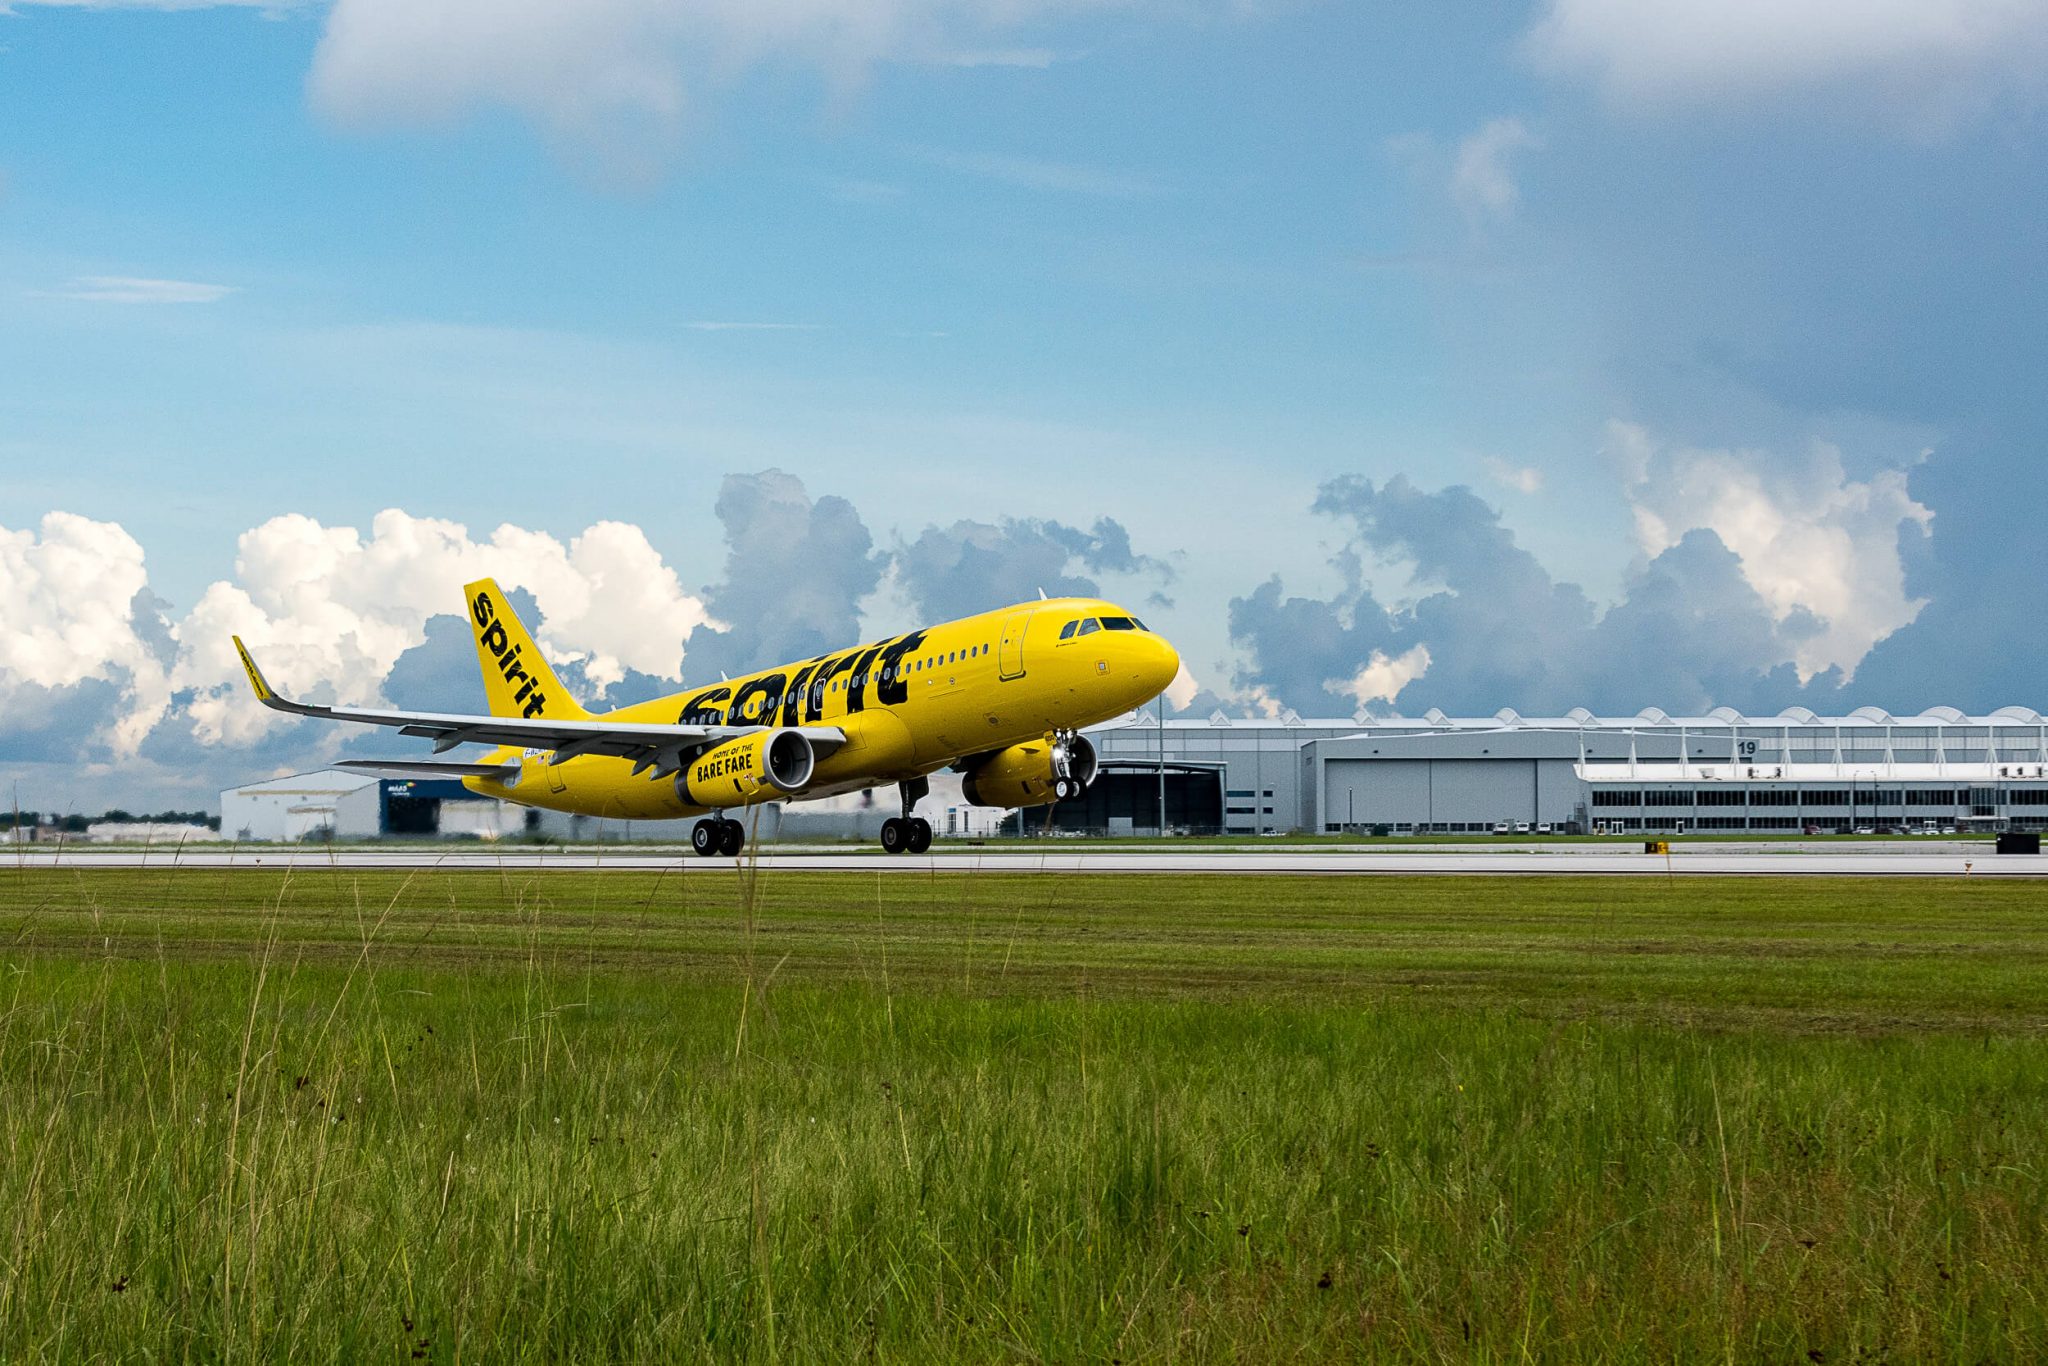 Spirit Airlines reports third quarter 2021 results